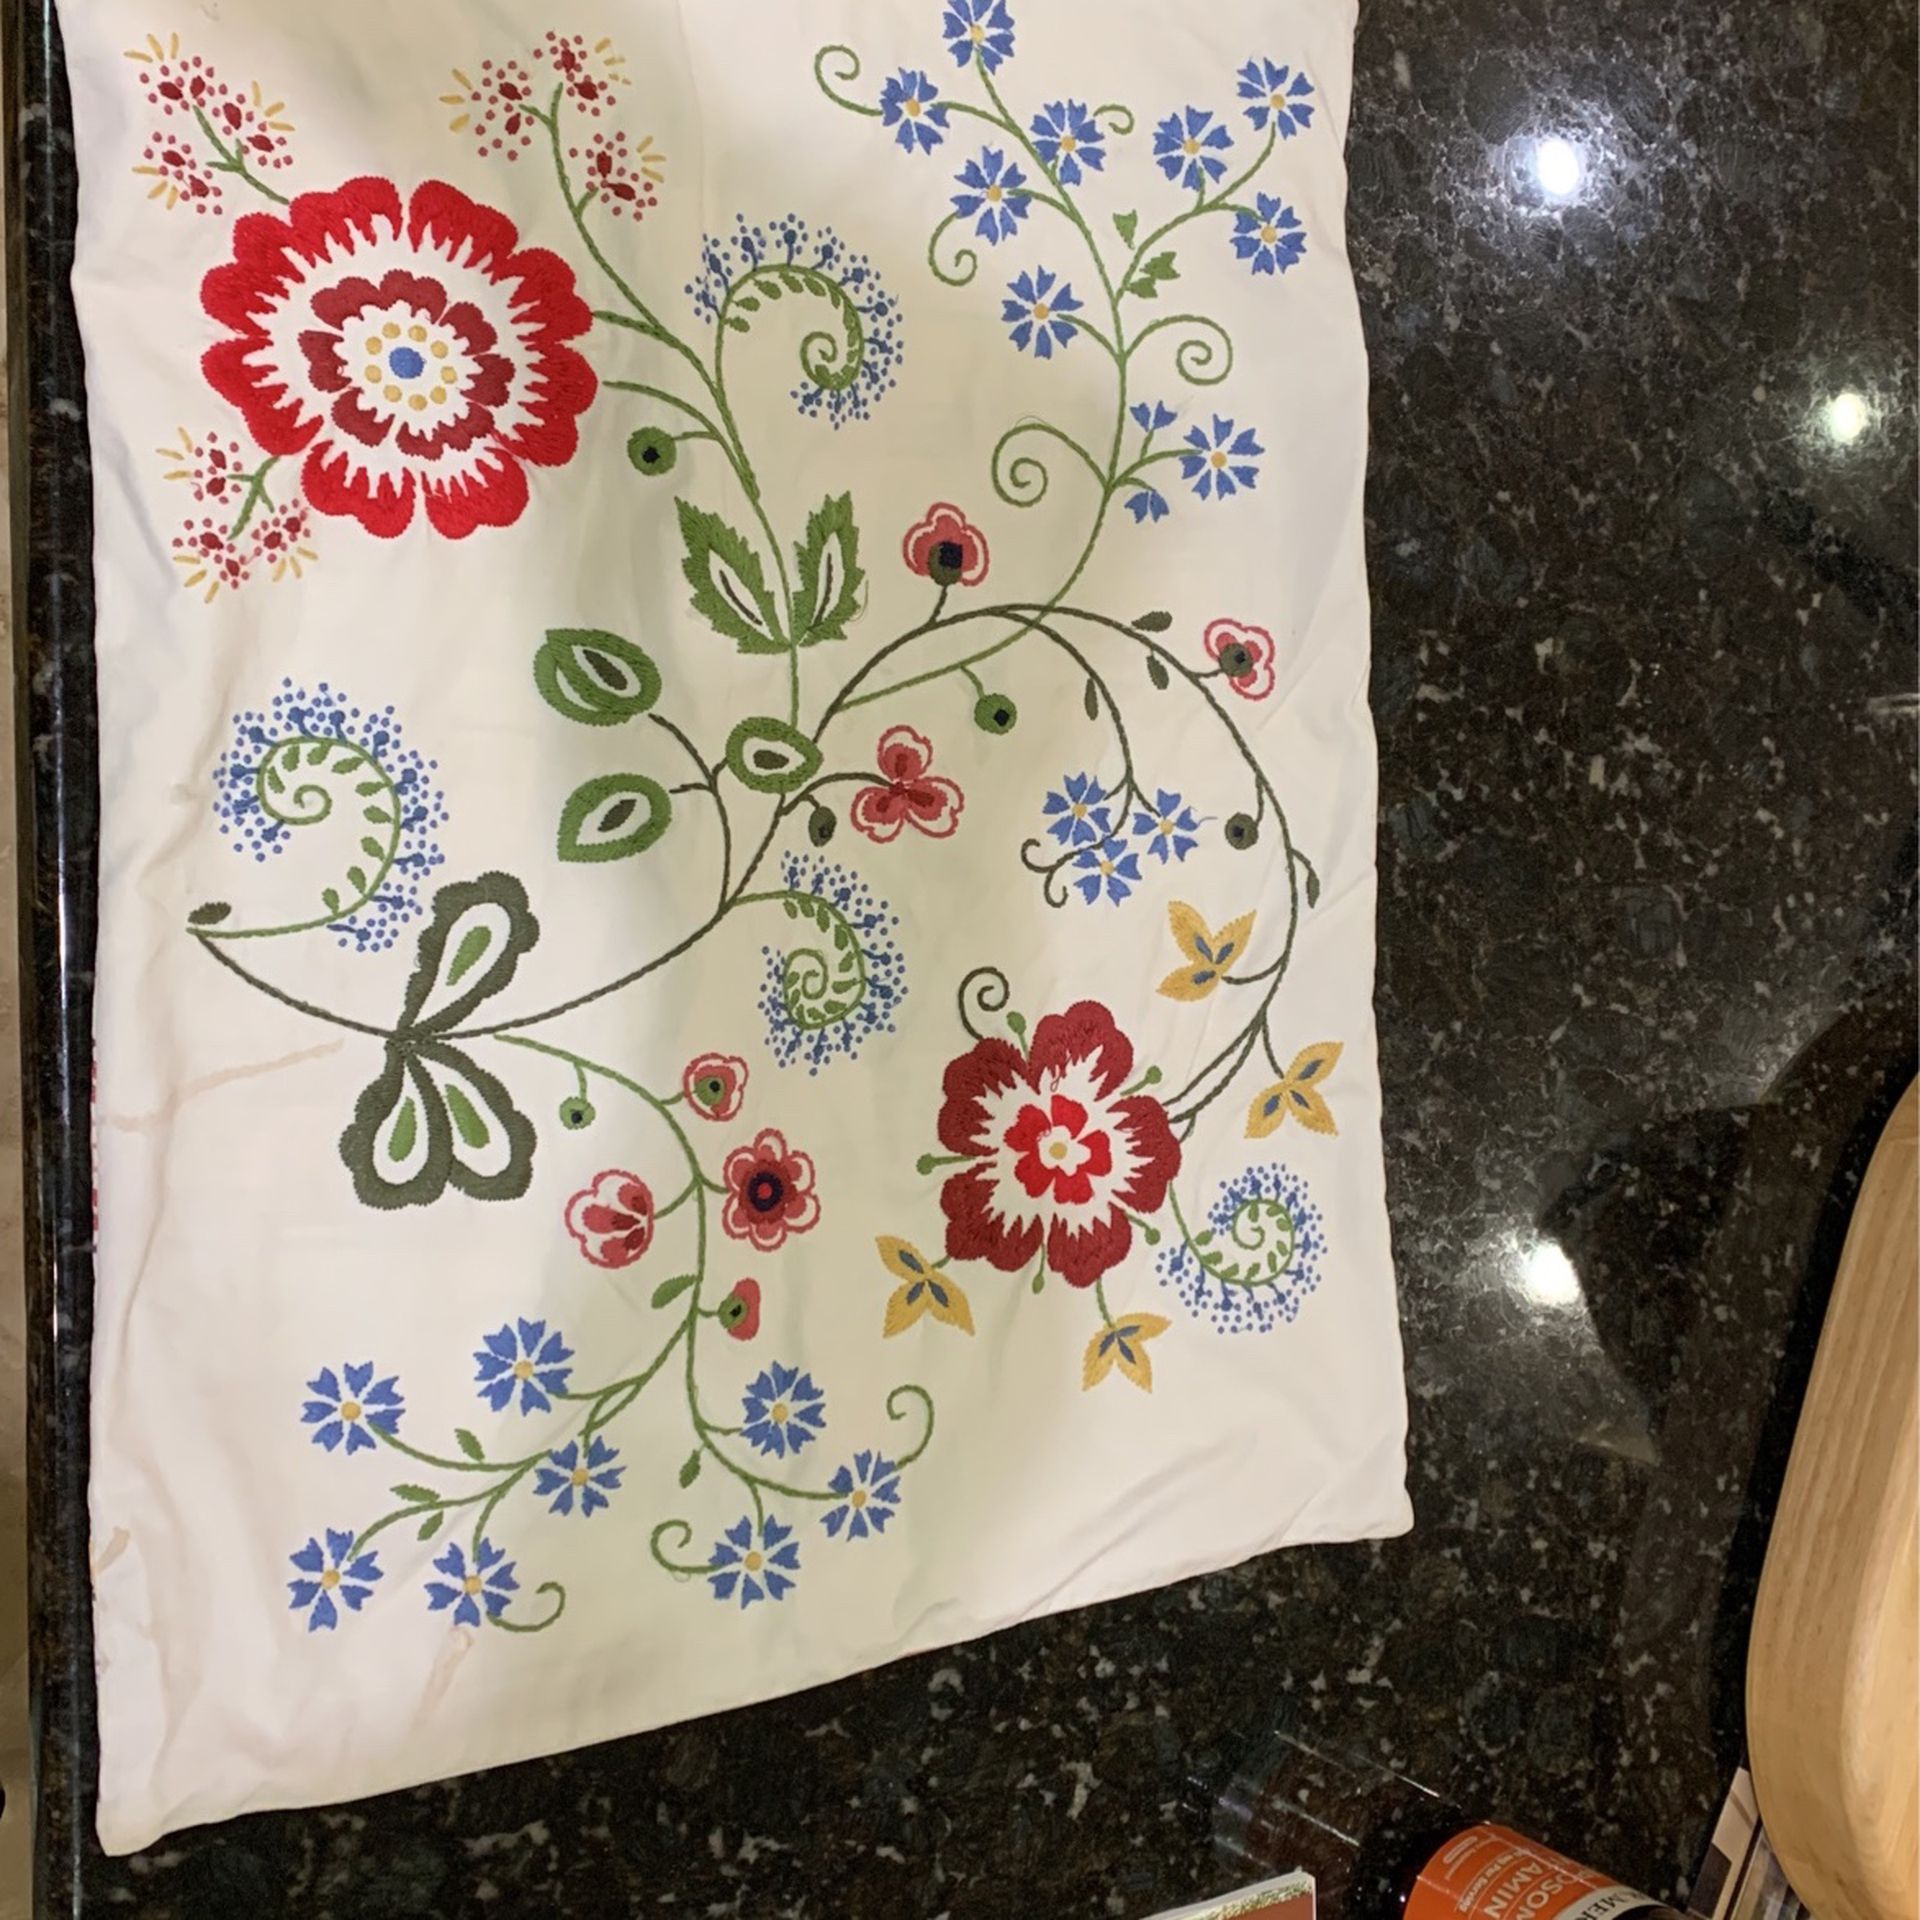 (4) Pillow Cases - Lovely Condition